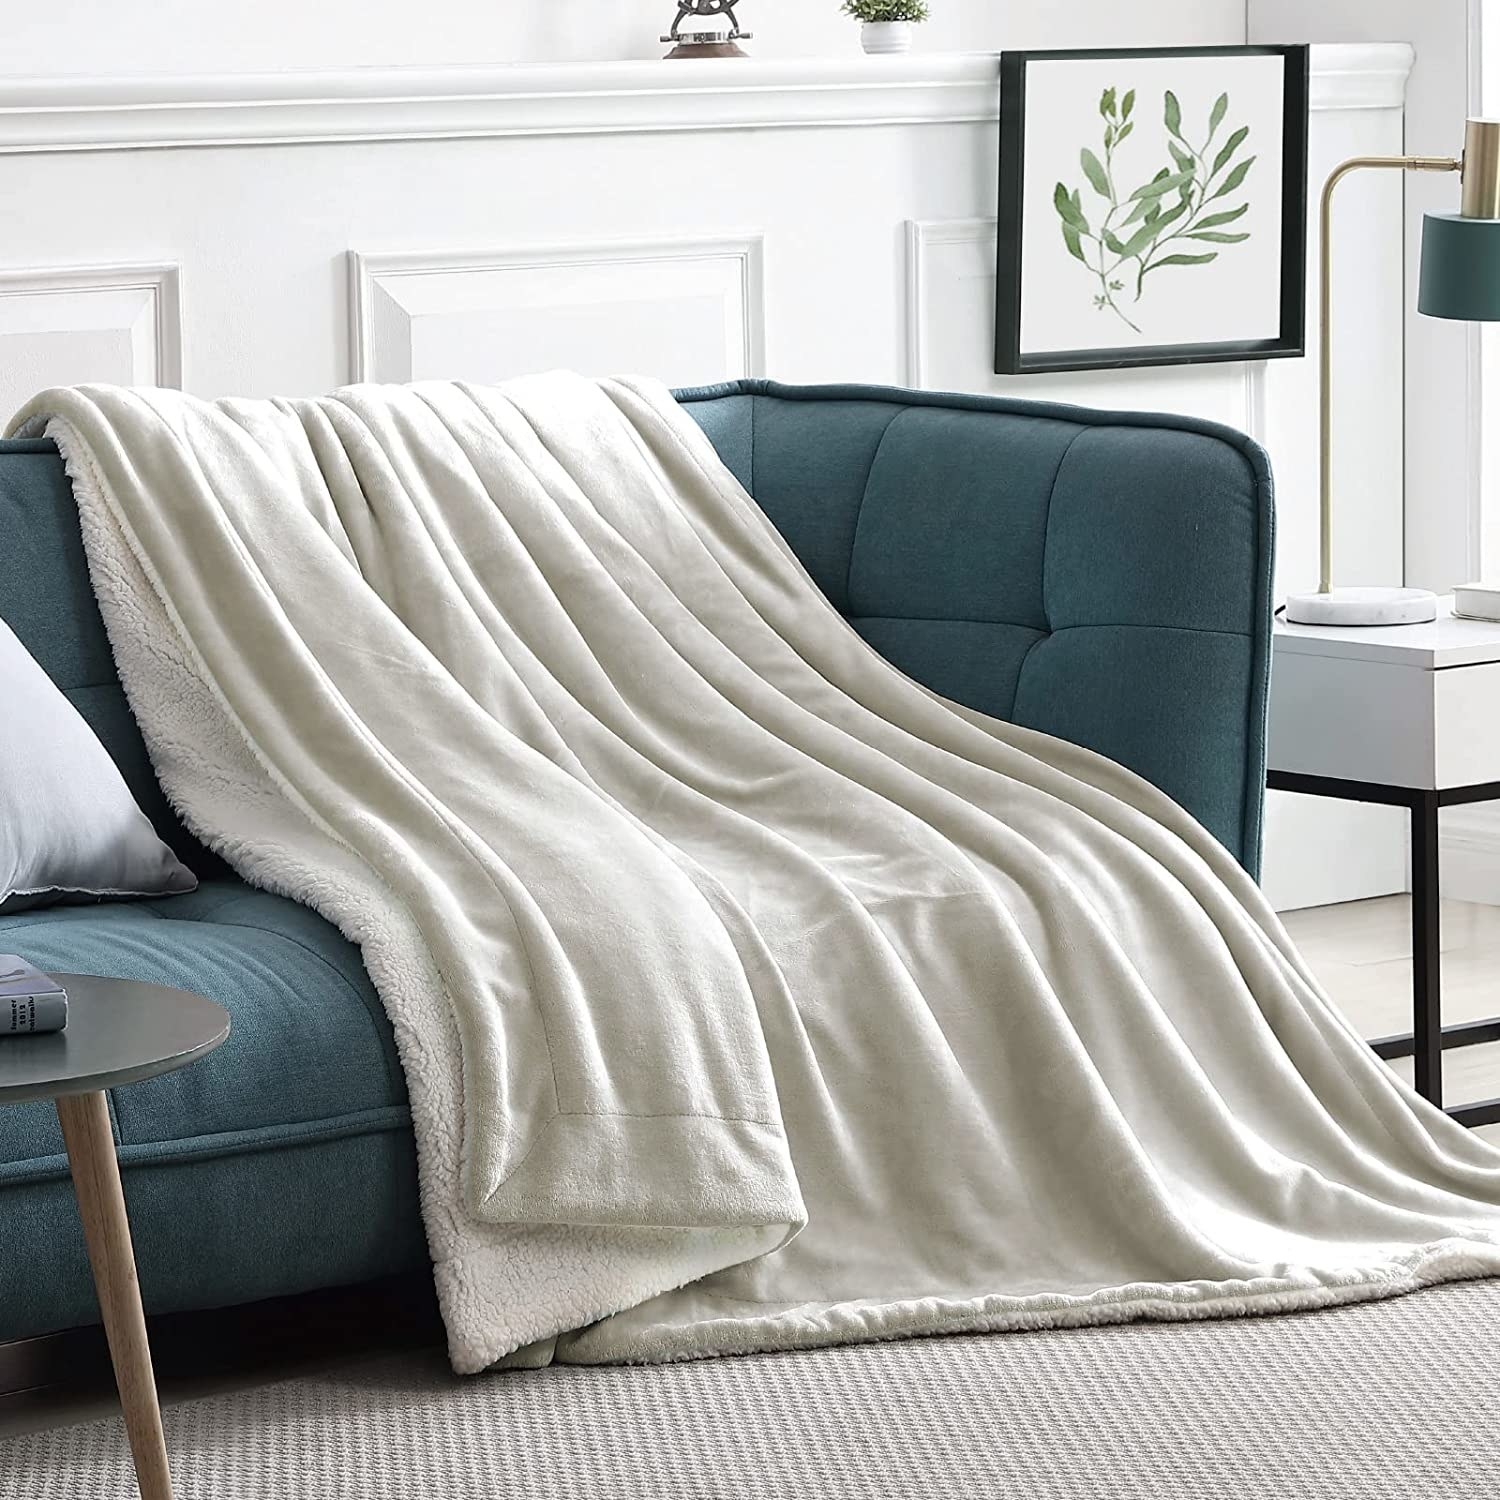 a double-sided blanket draped over a couch